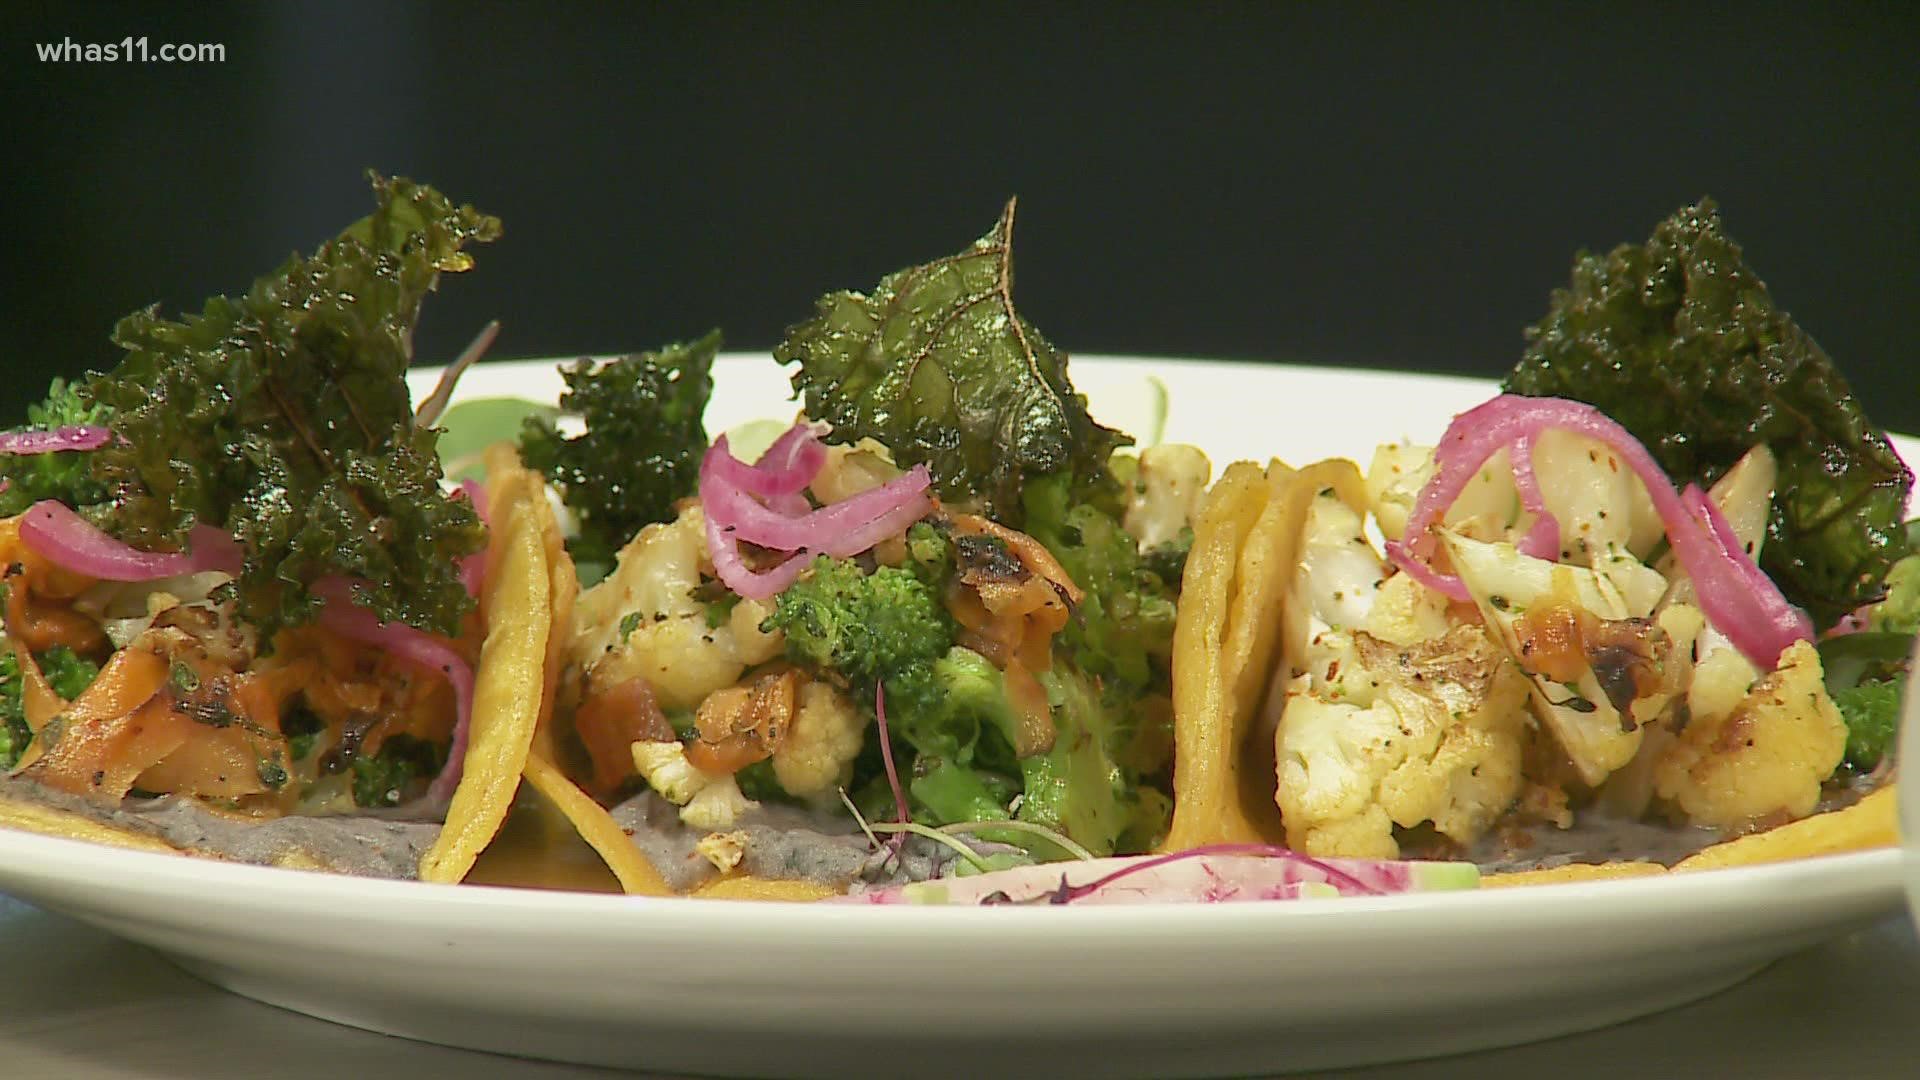 The popular taco-themed restaurant week is returning for its second year.